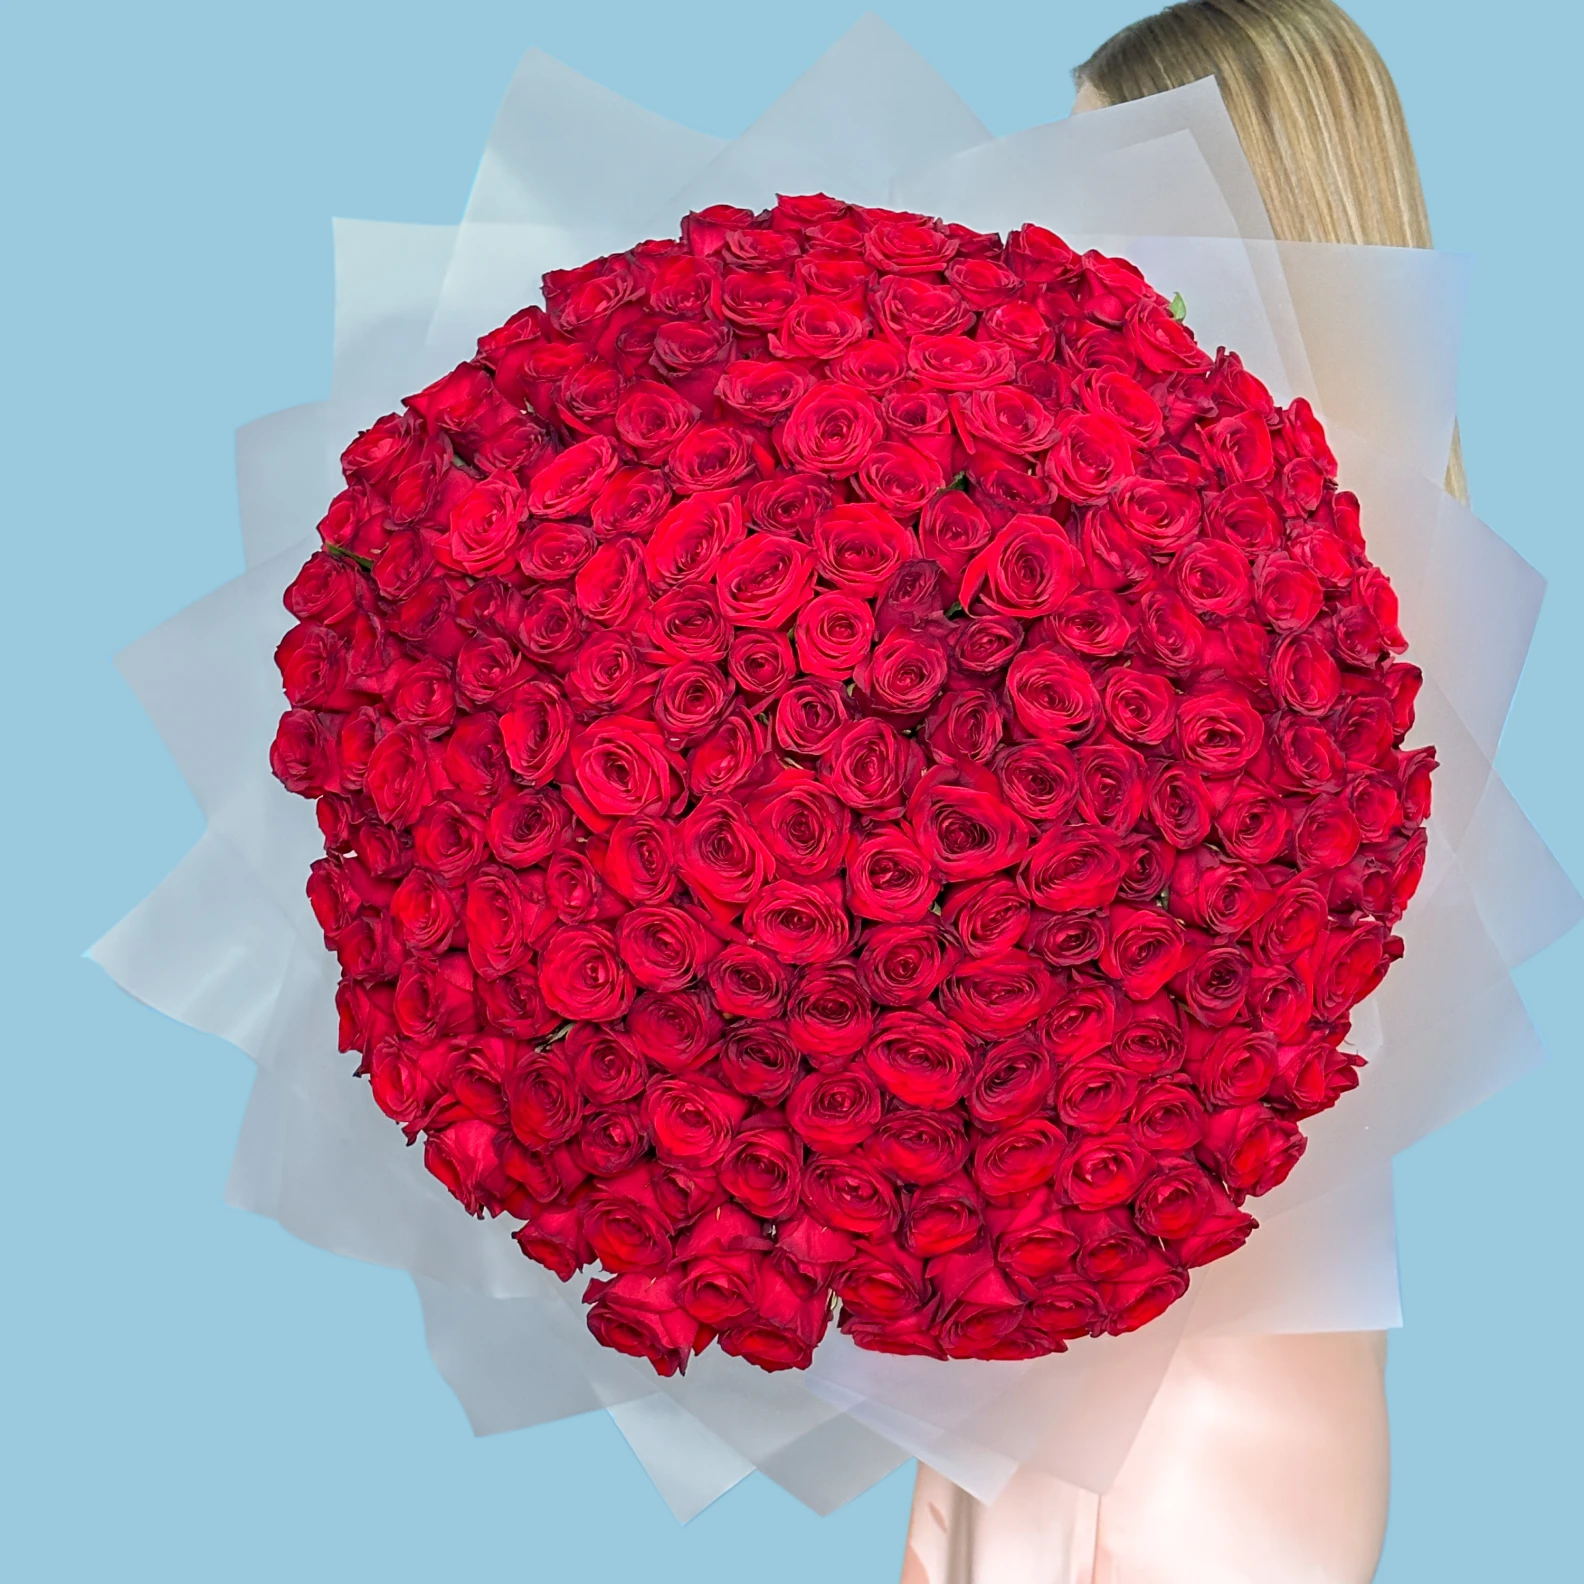 200 Red Roses - image №3